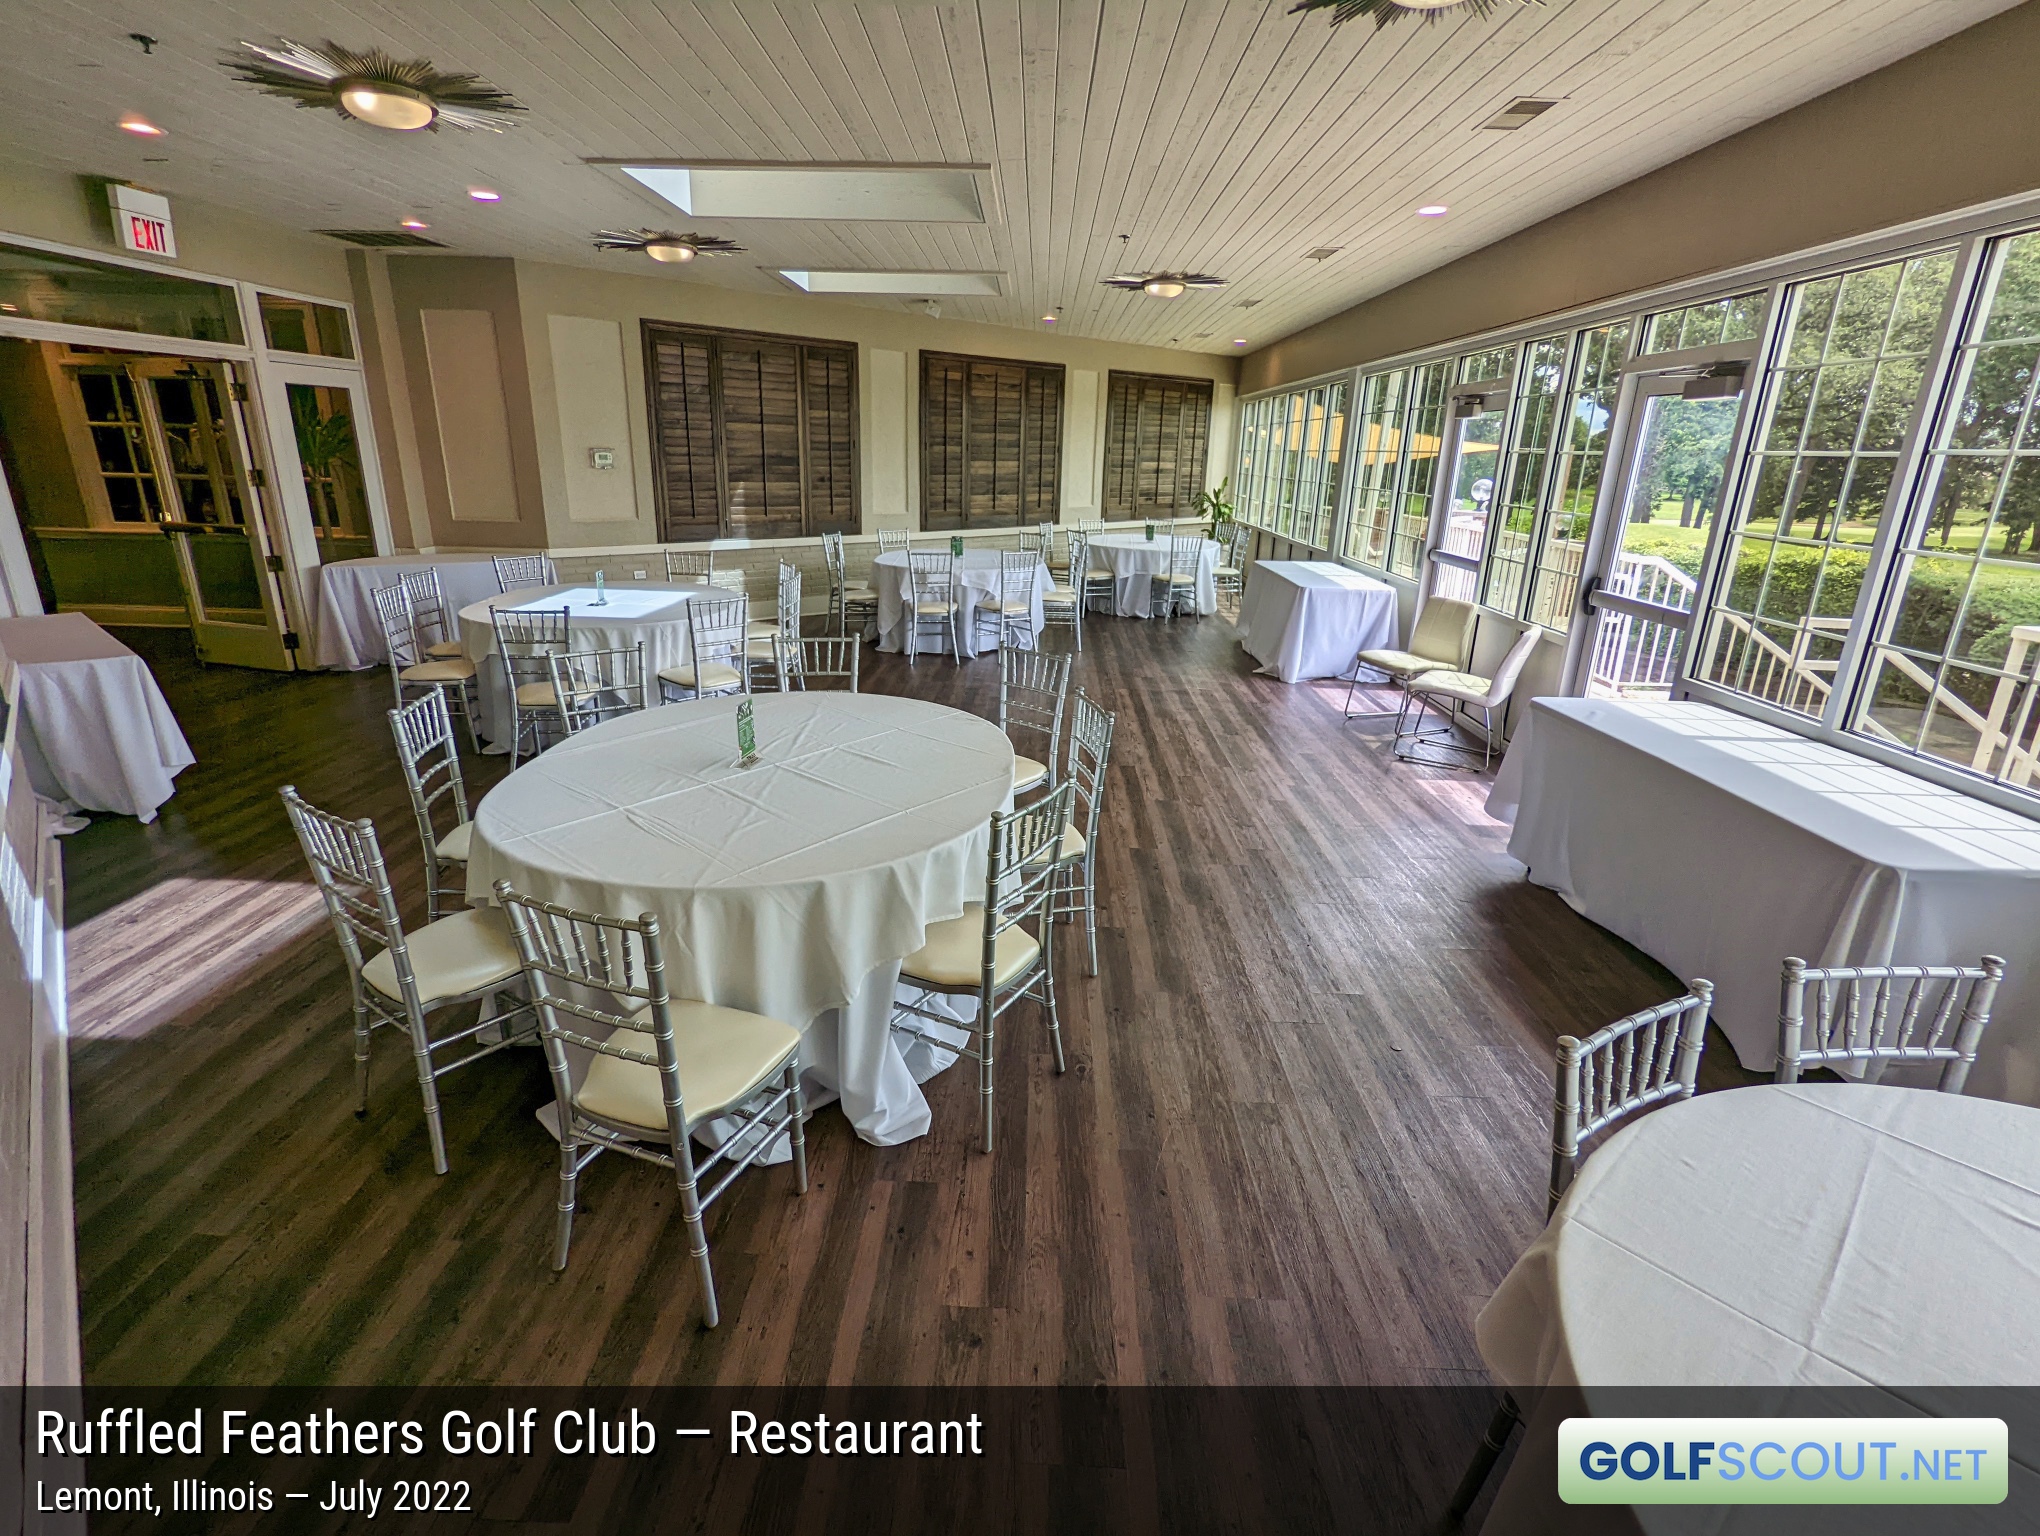 Photo of the restaurant at Ruffled Feathers Golf Club in Lemont, Illinois. 